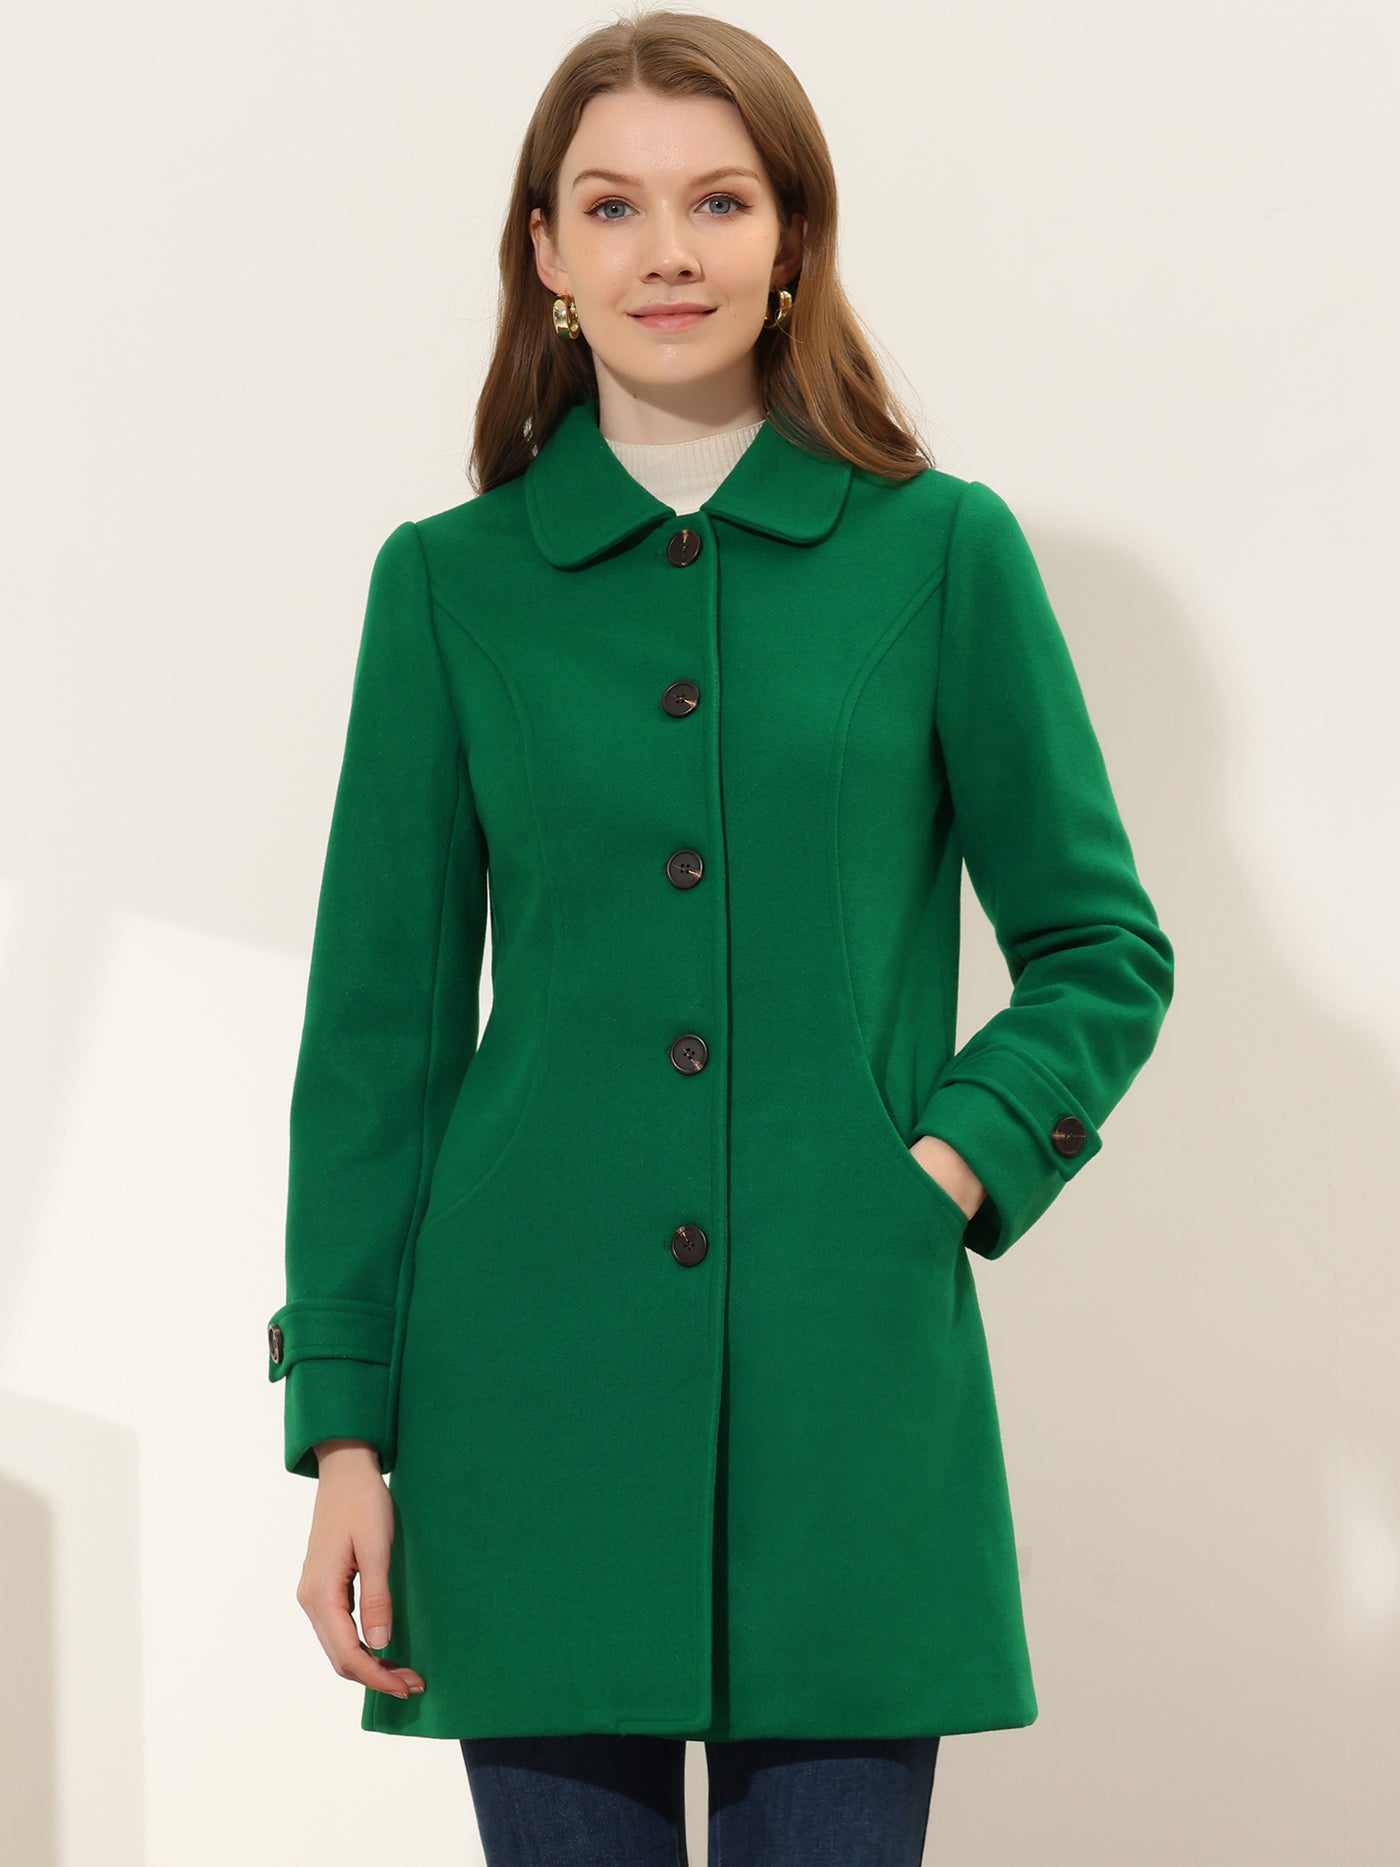 Allegra K Winter Peter Pan Collar Mid-thigh A-line Single Breasted Pea Coat